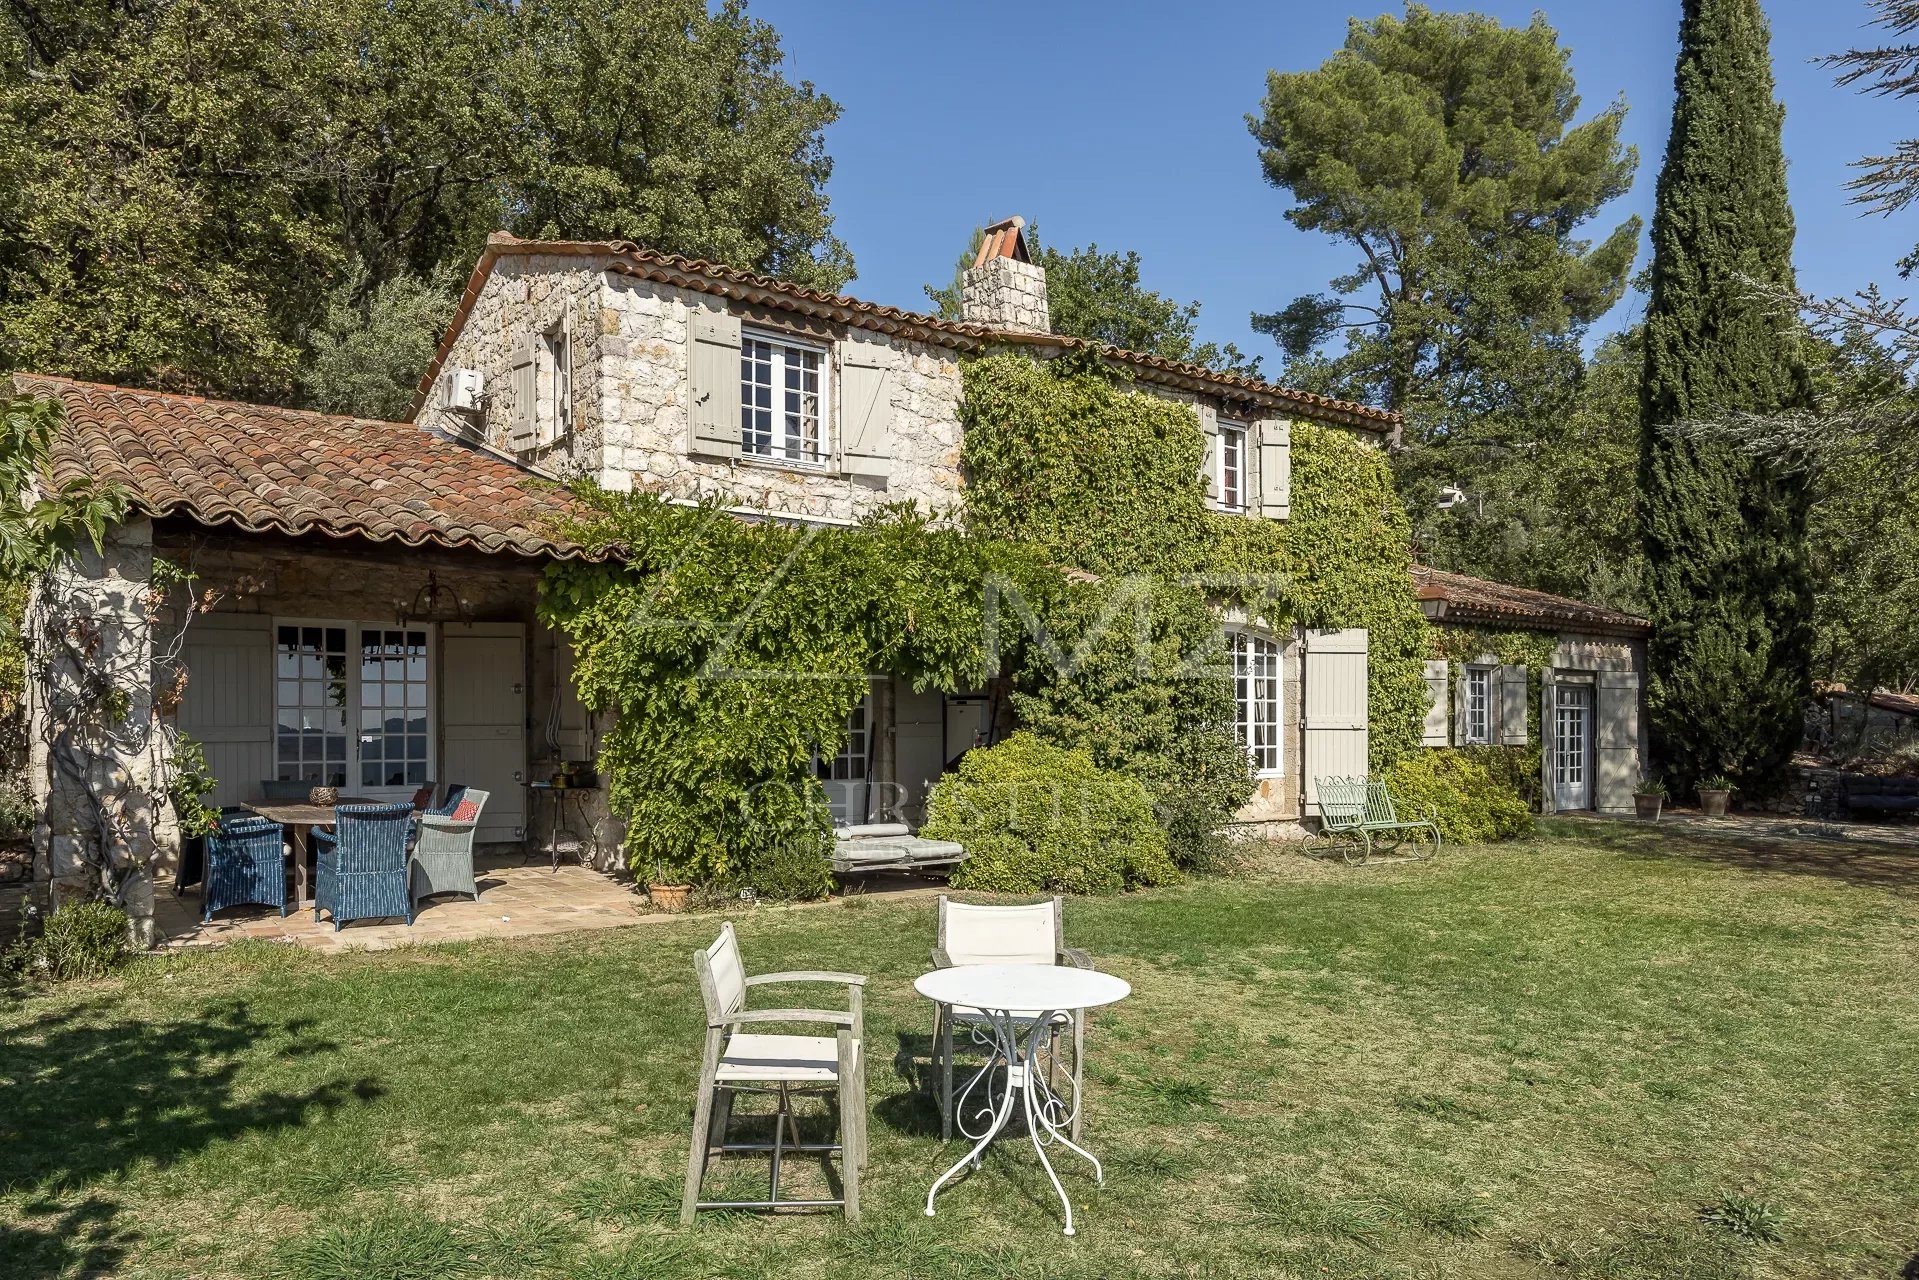 Charming Bergerie set in extensive grounds